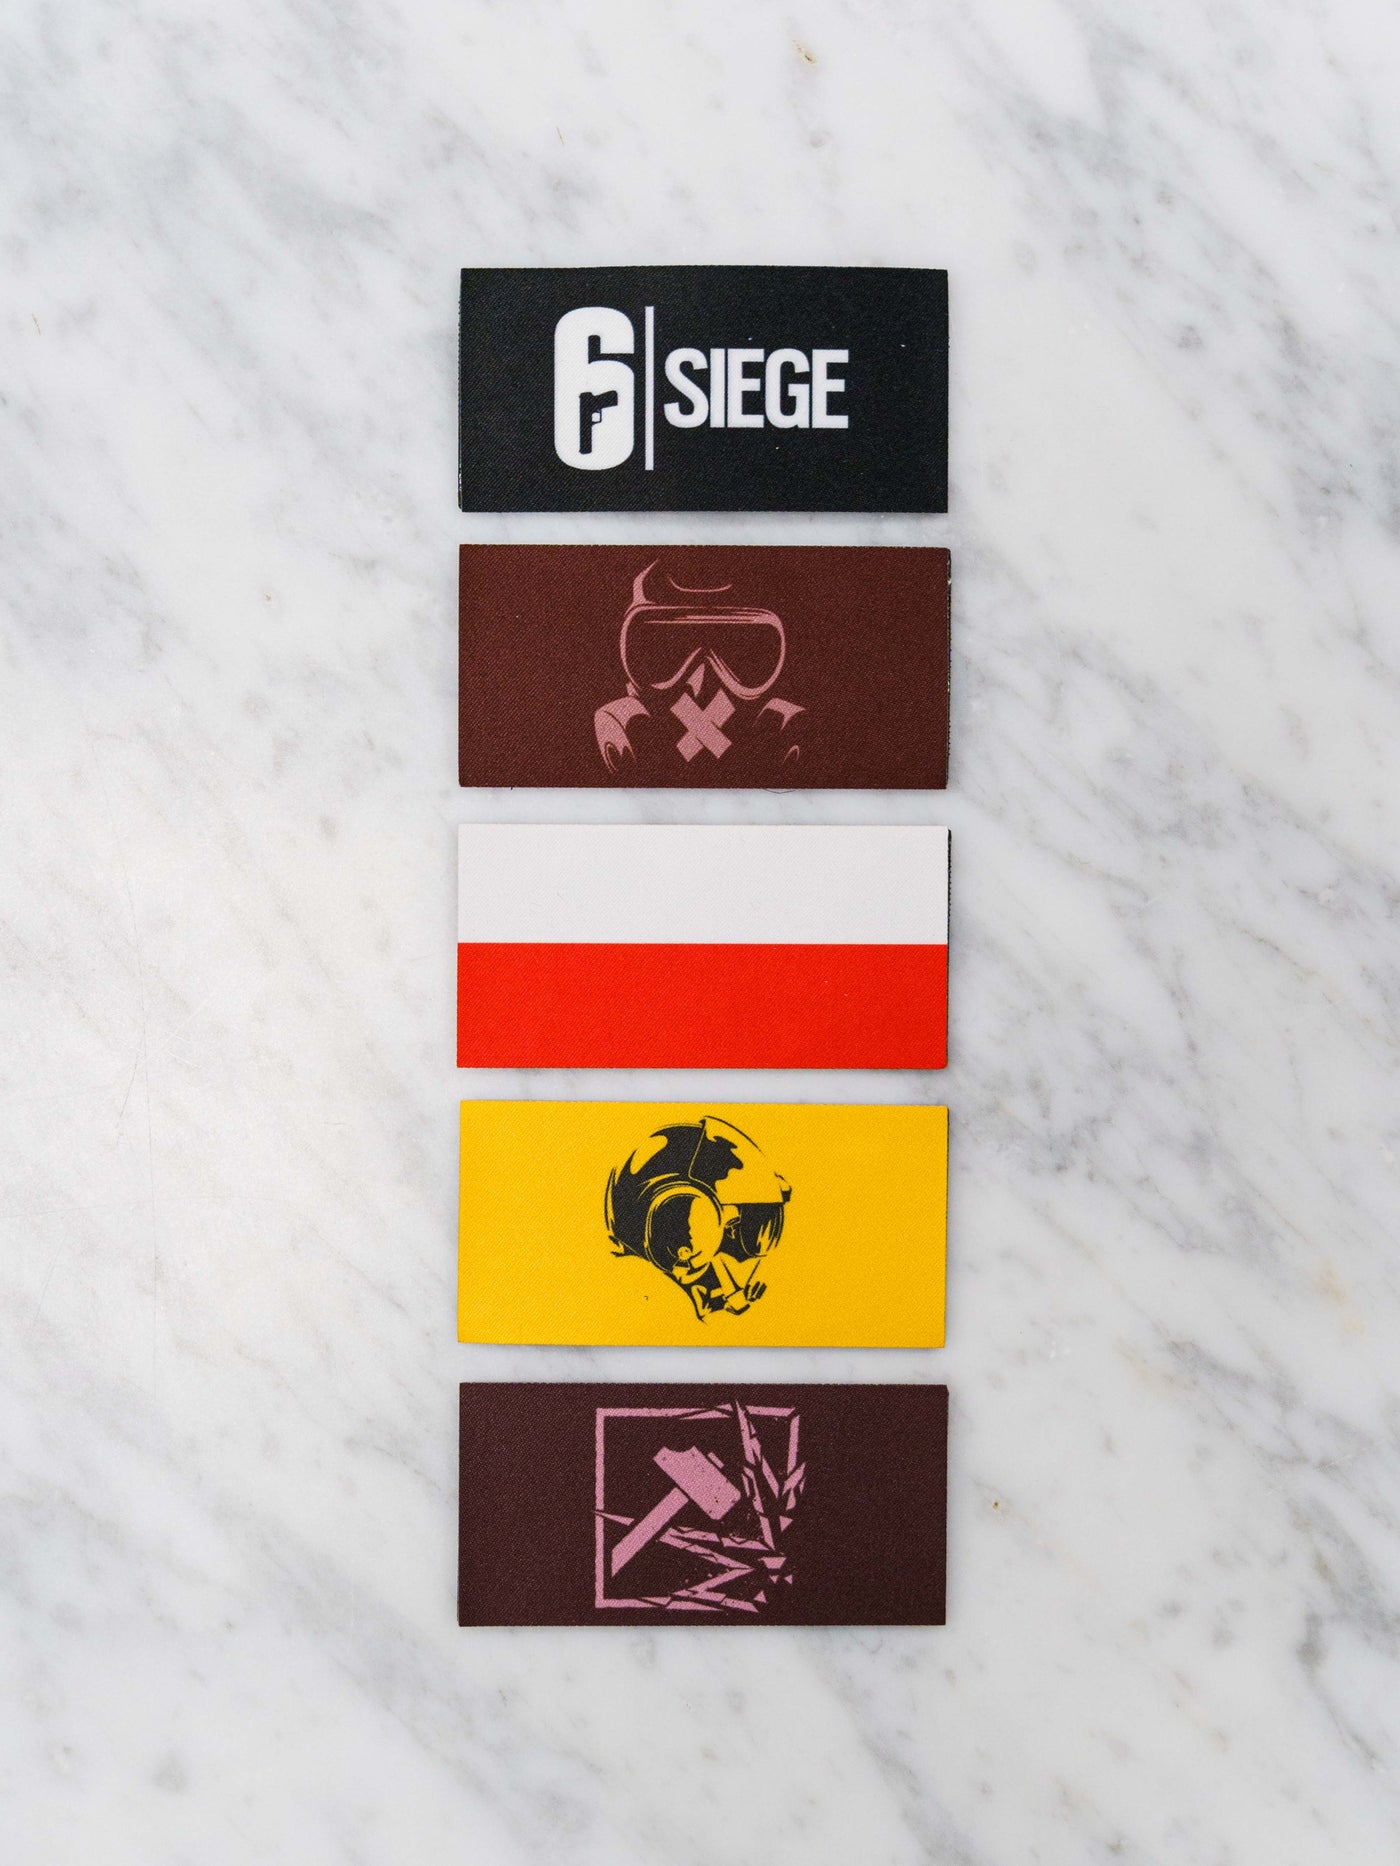 6 SIEGE Patch pack 1